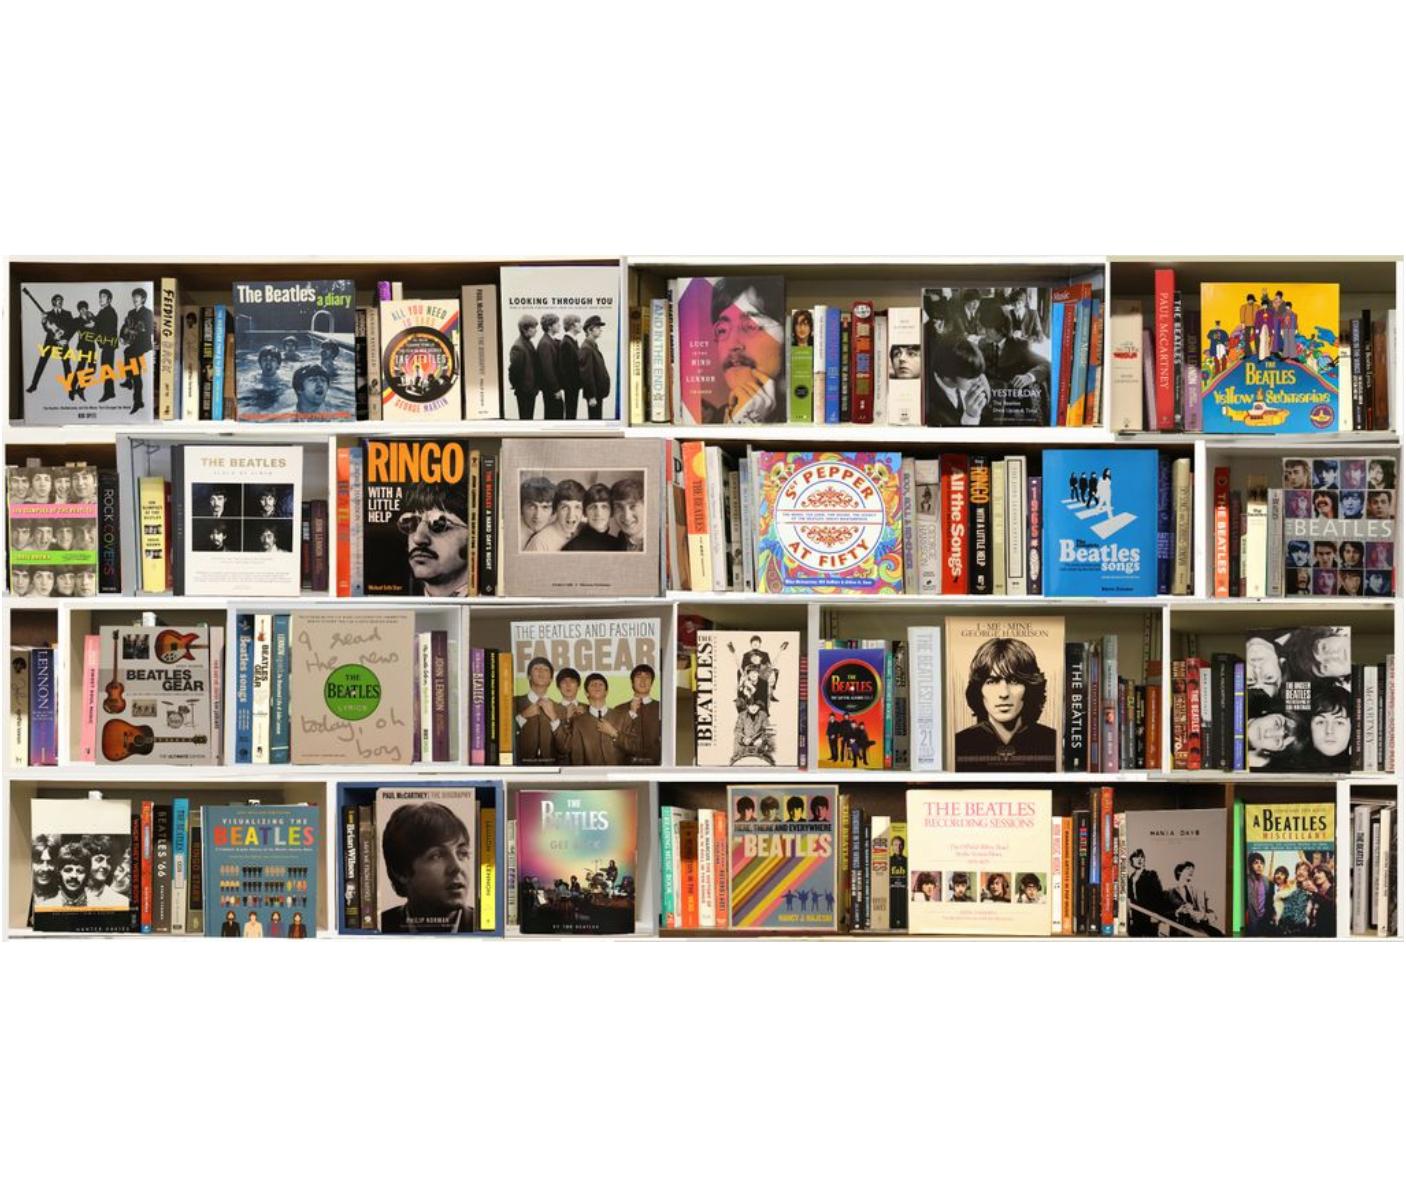 Beatles Ed. 1/5 - 37 x 75 in. BookScape by Max Steven Grossman 

Individually photographed books and bookshelves. LED lights and standard plug in; no hardware needed. Illuminated bookshelves featuring books on The Beatles. 

In his photographic